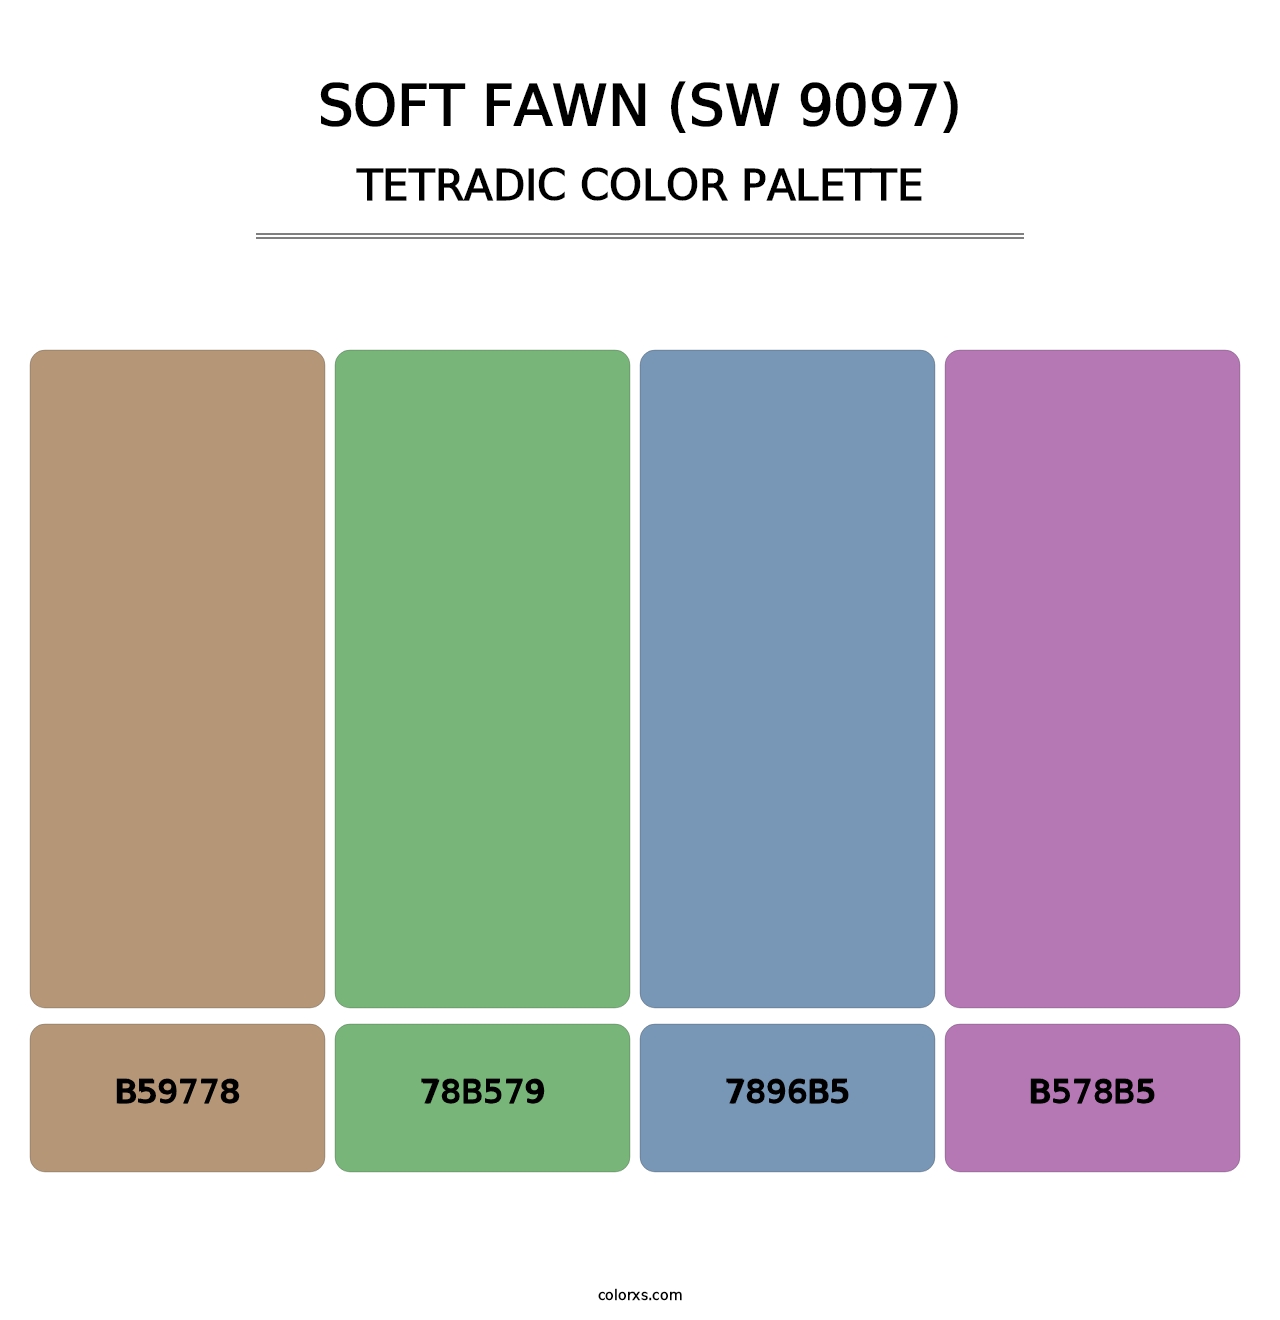 Soft Fawn (SW 9097) - Tetradic Color Palette